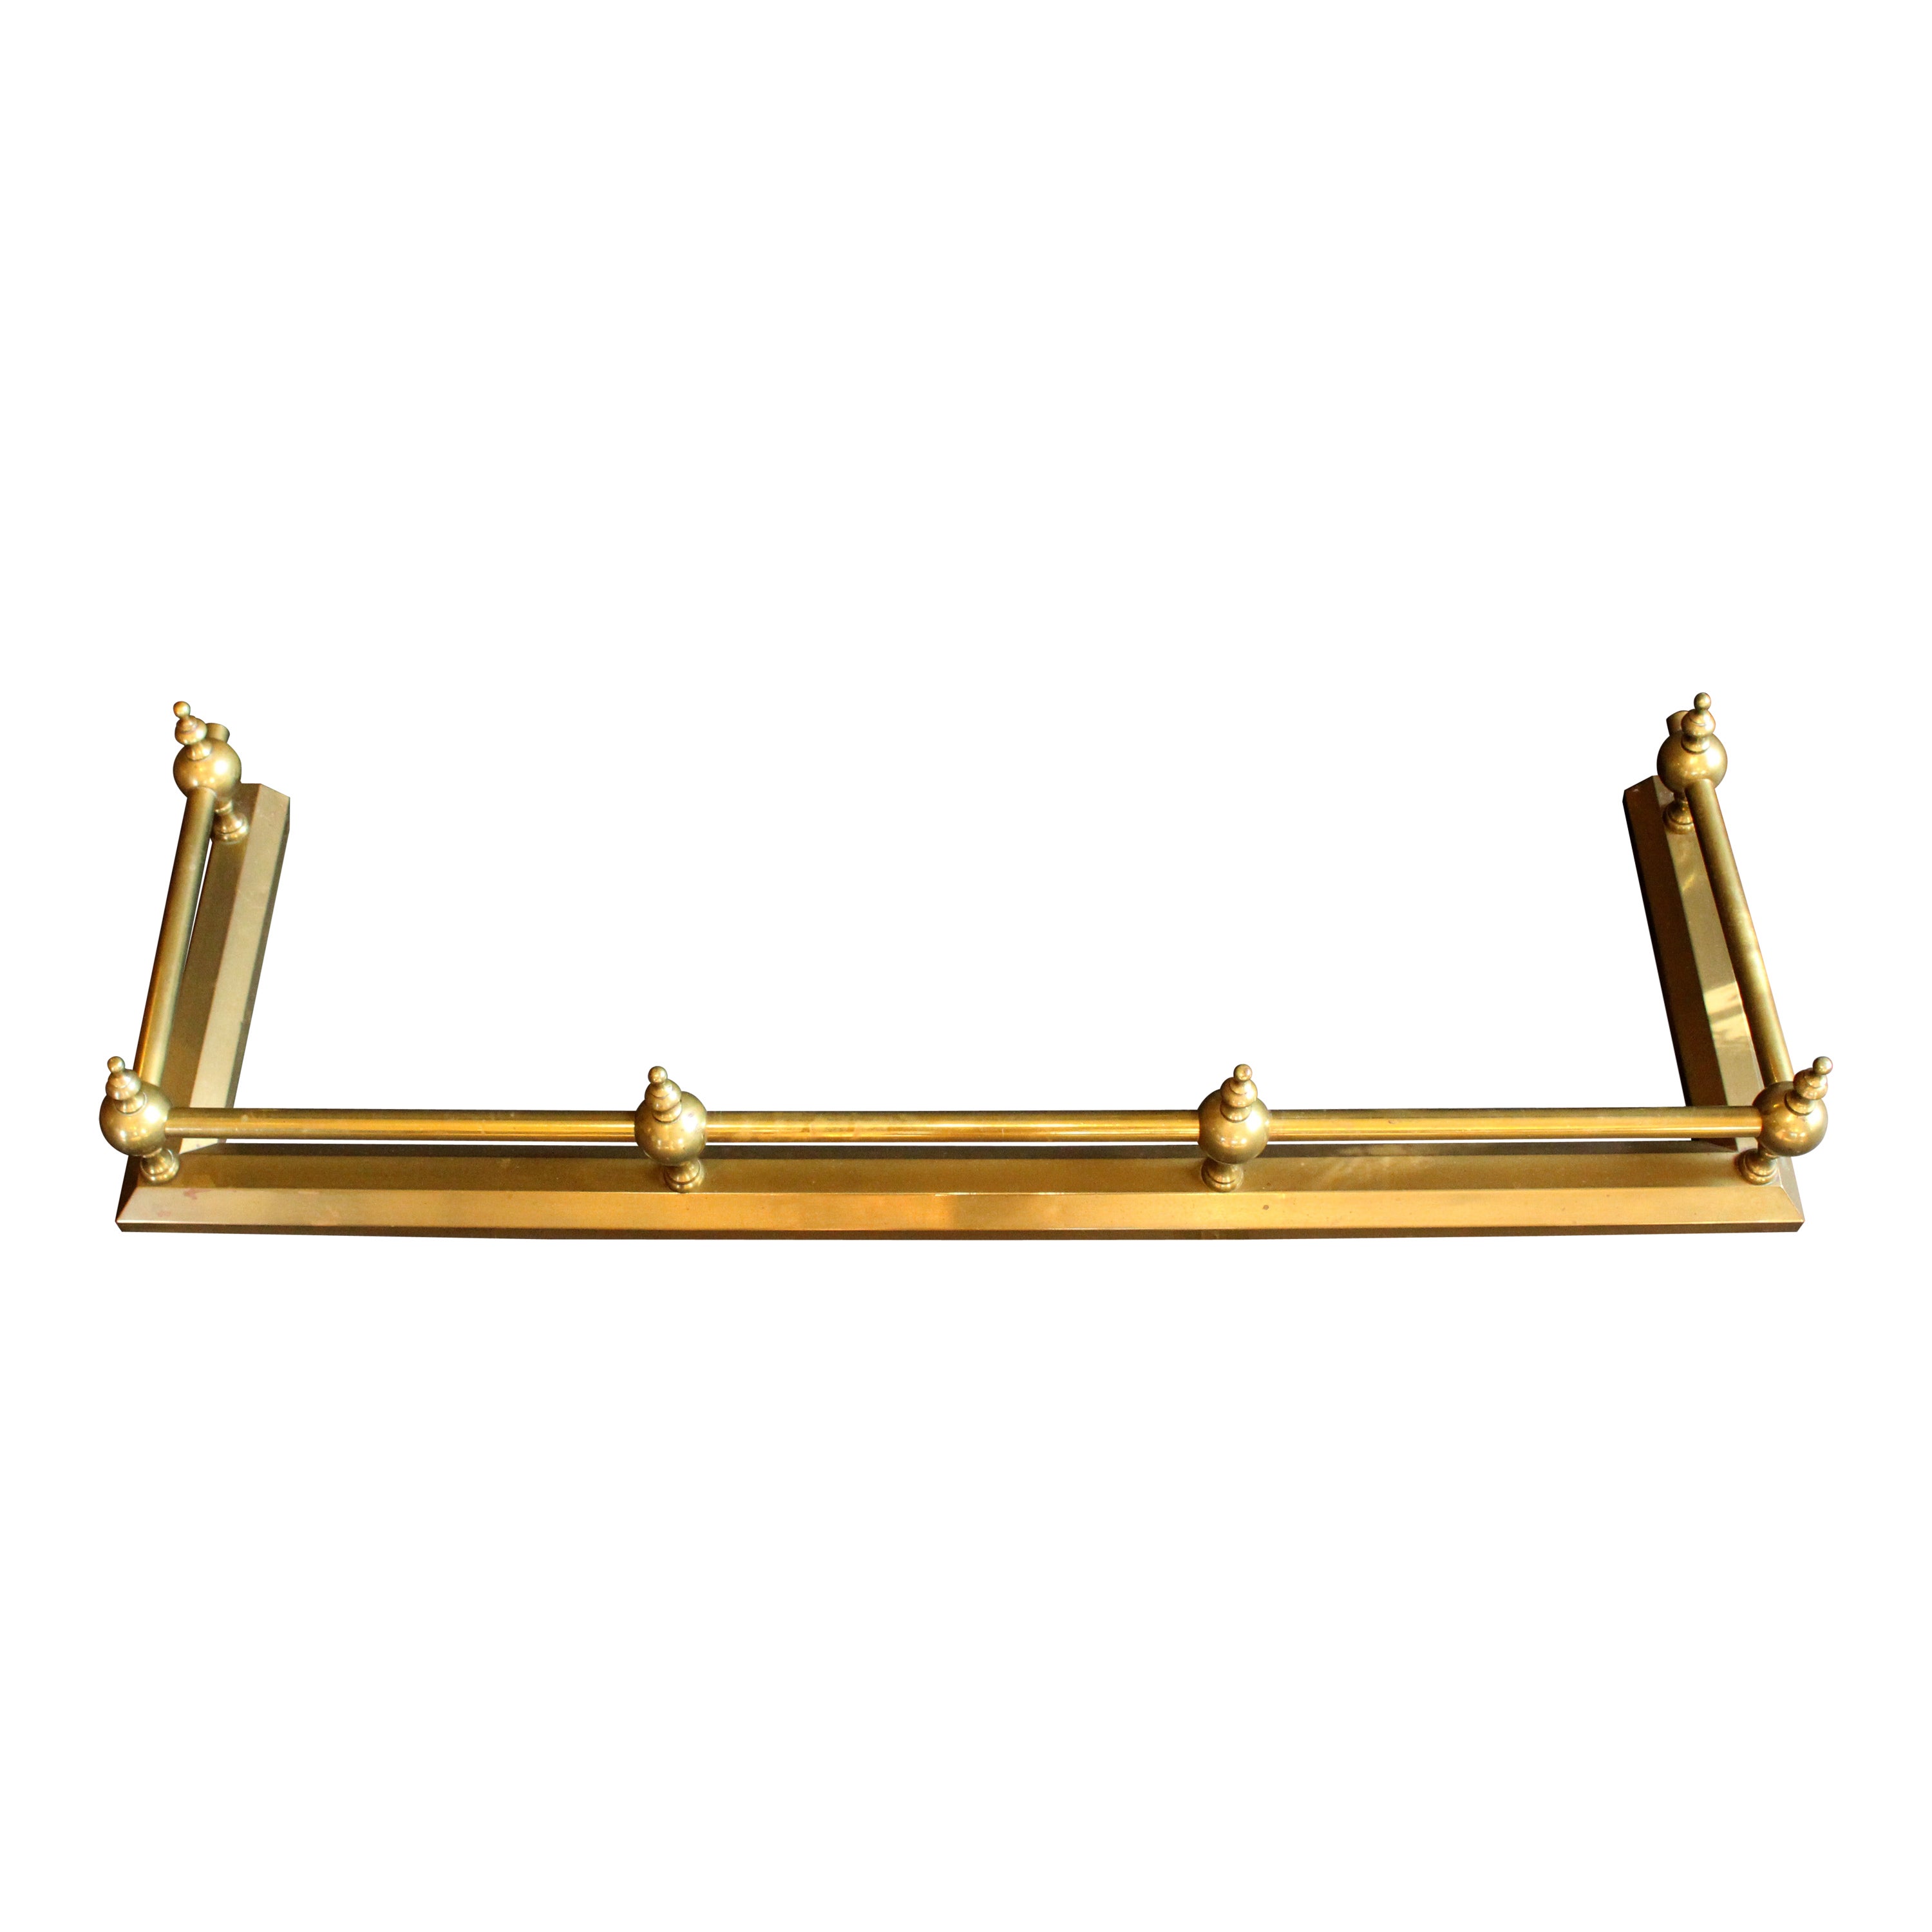 c. 1860 English Brass Fireplace Fender For Sale